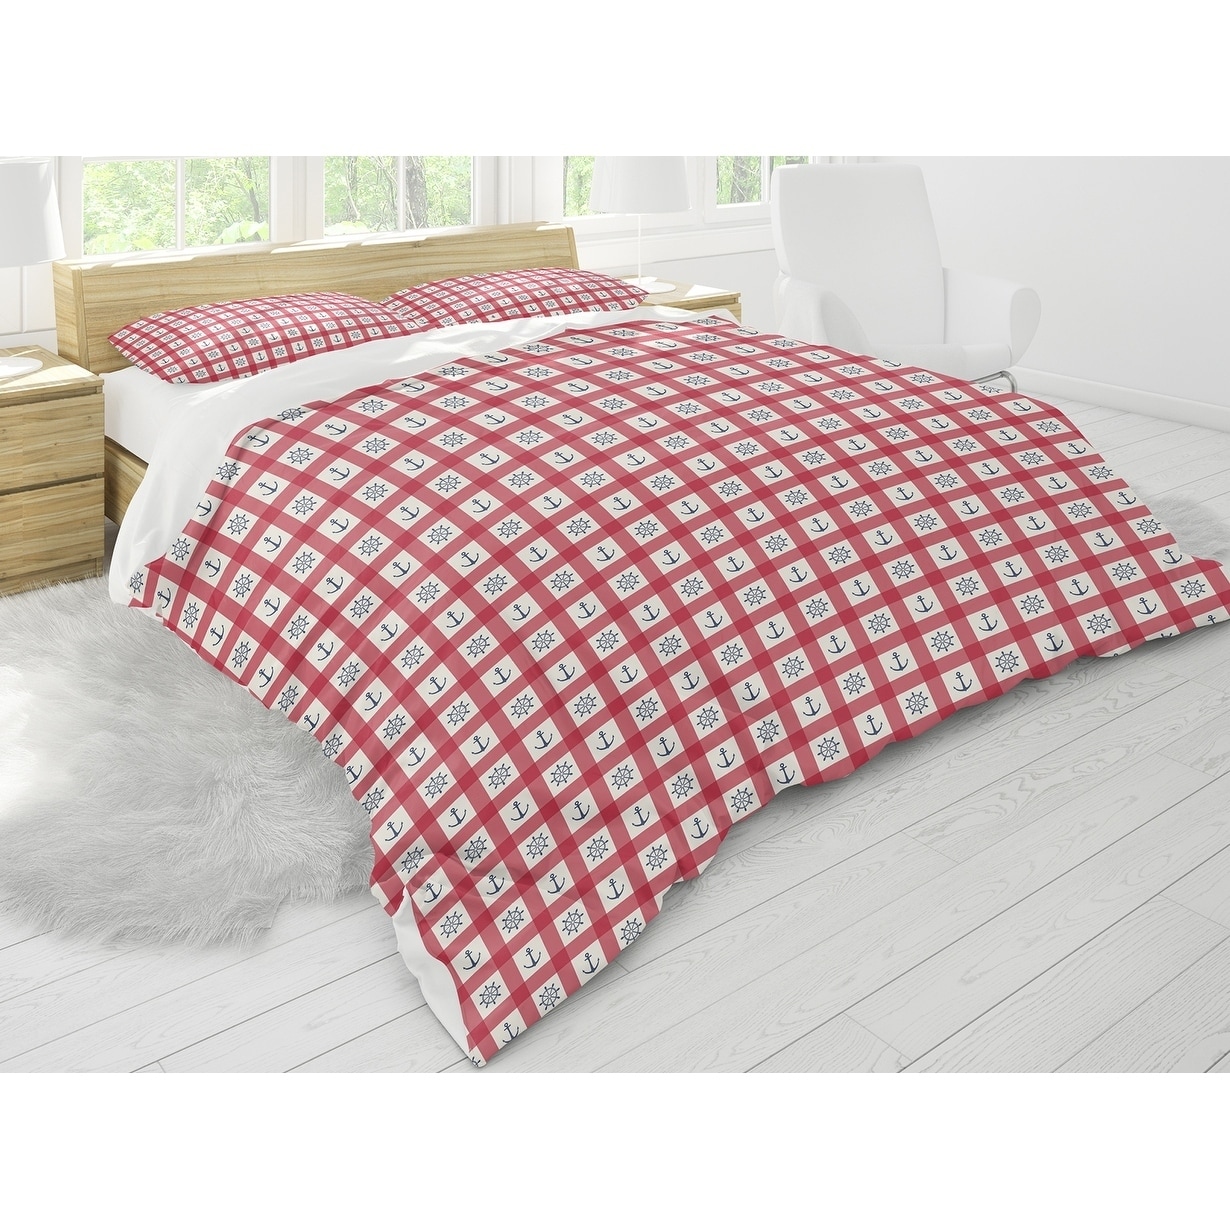 blue and red plaid comforter